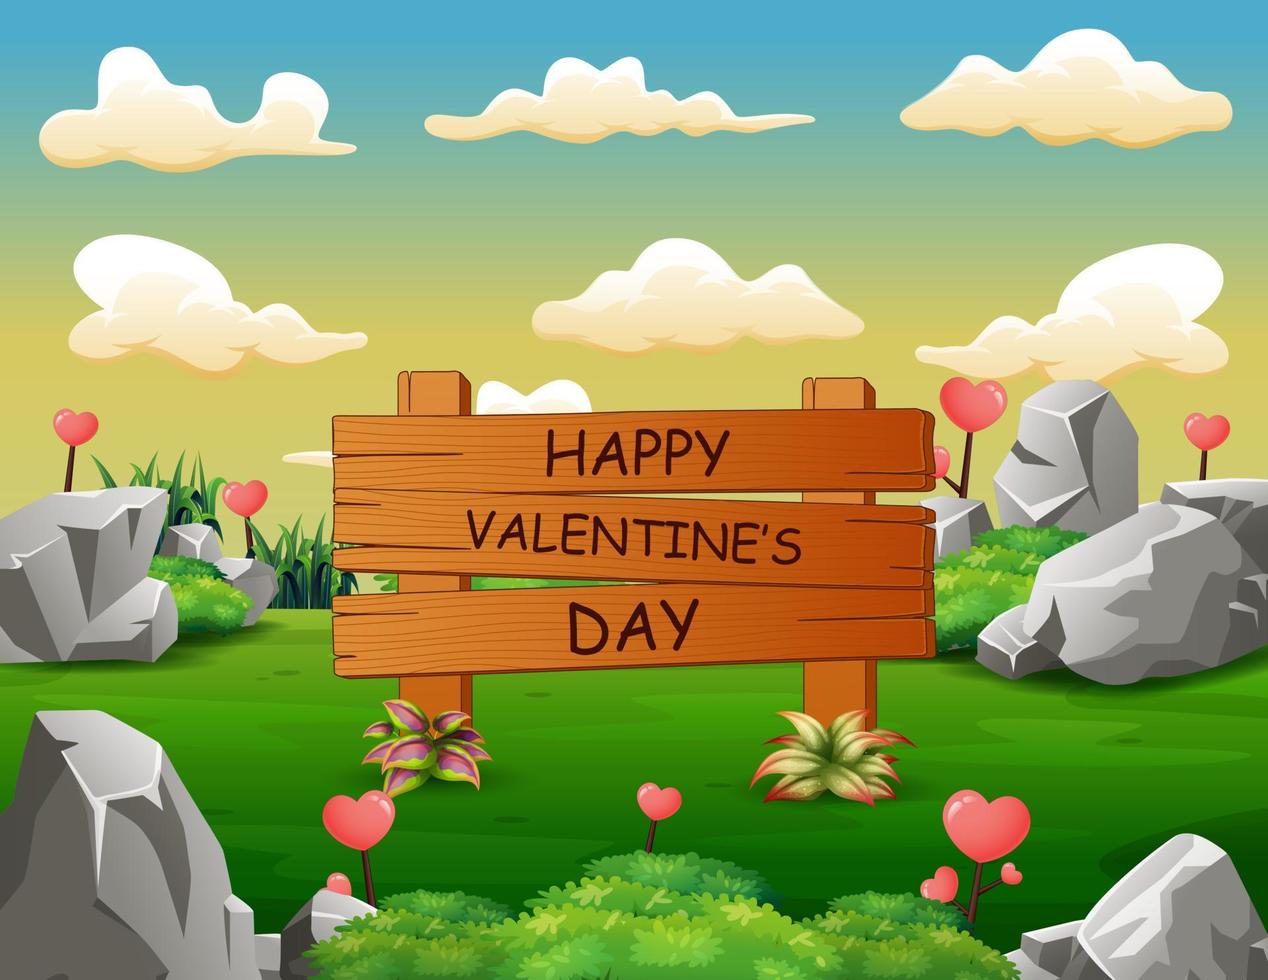 Happy Valentines Day sign in green landscape vector